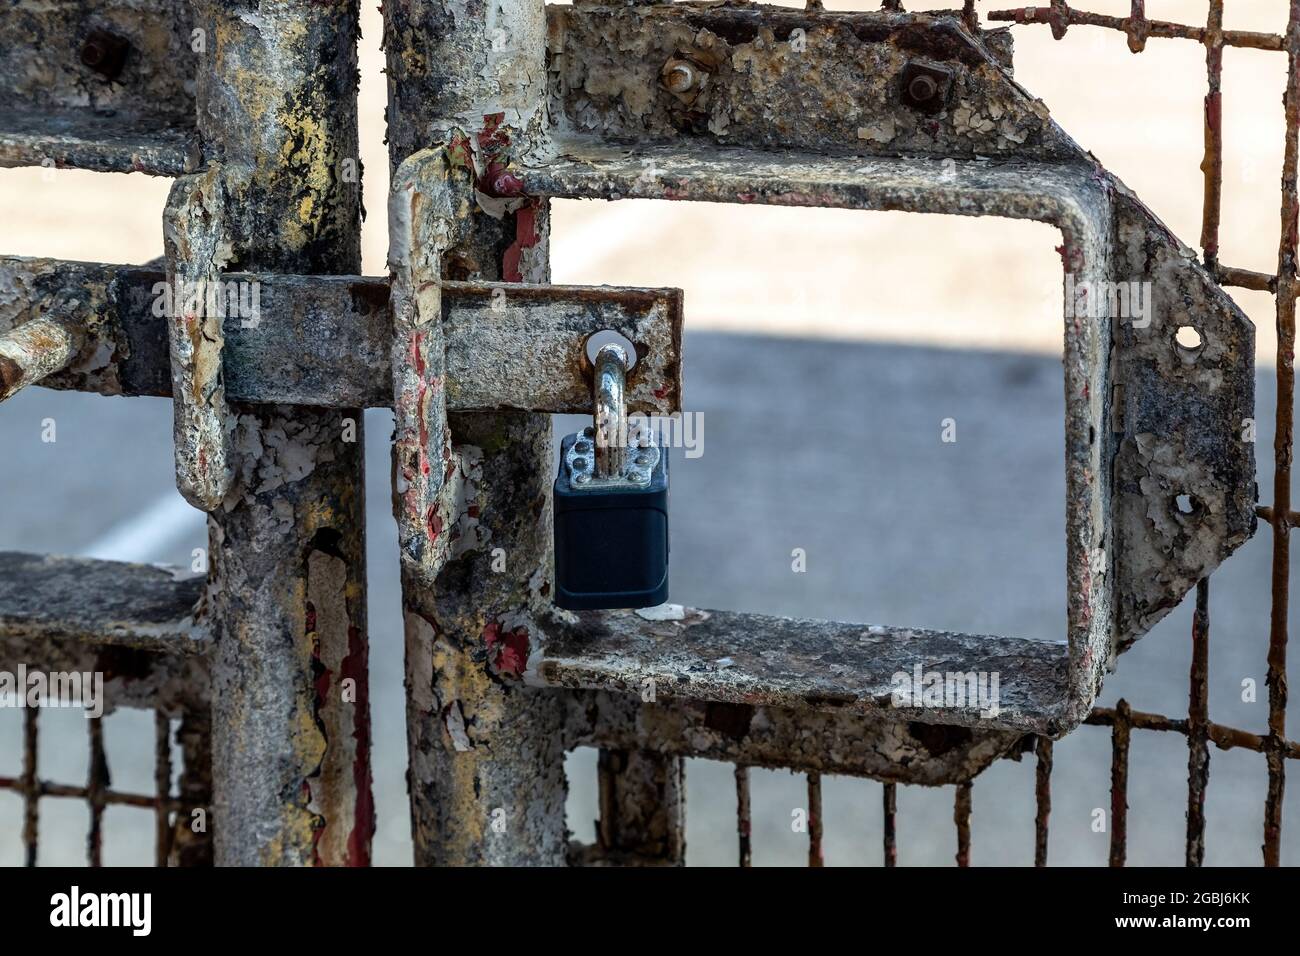 A padlock hanging on an old rusty metal gate Stock Photo